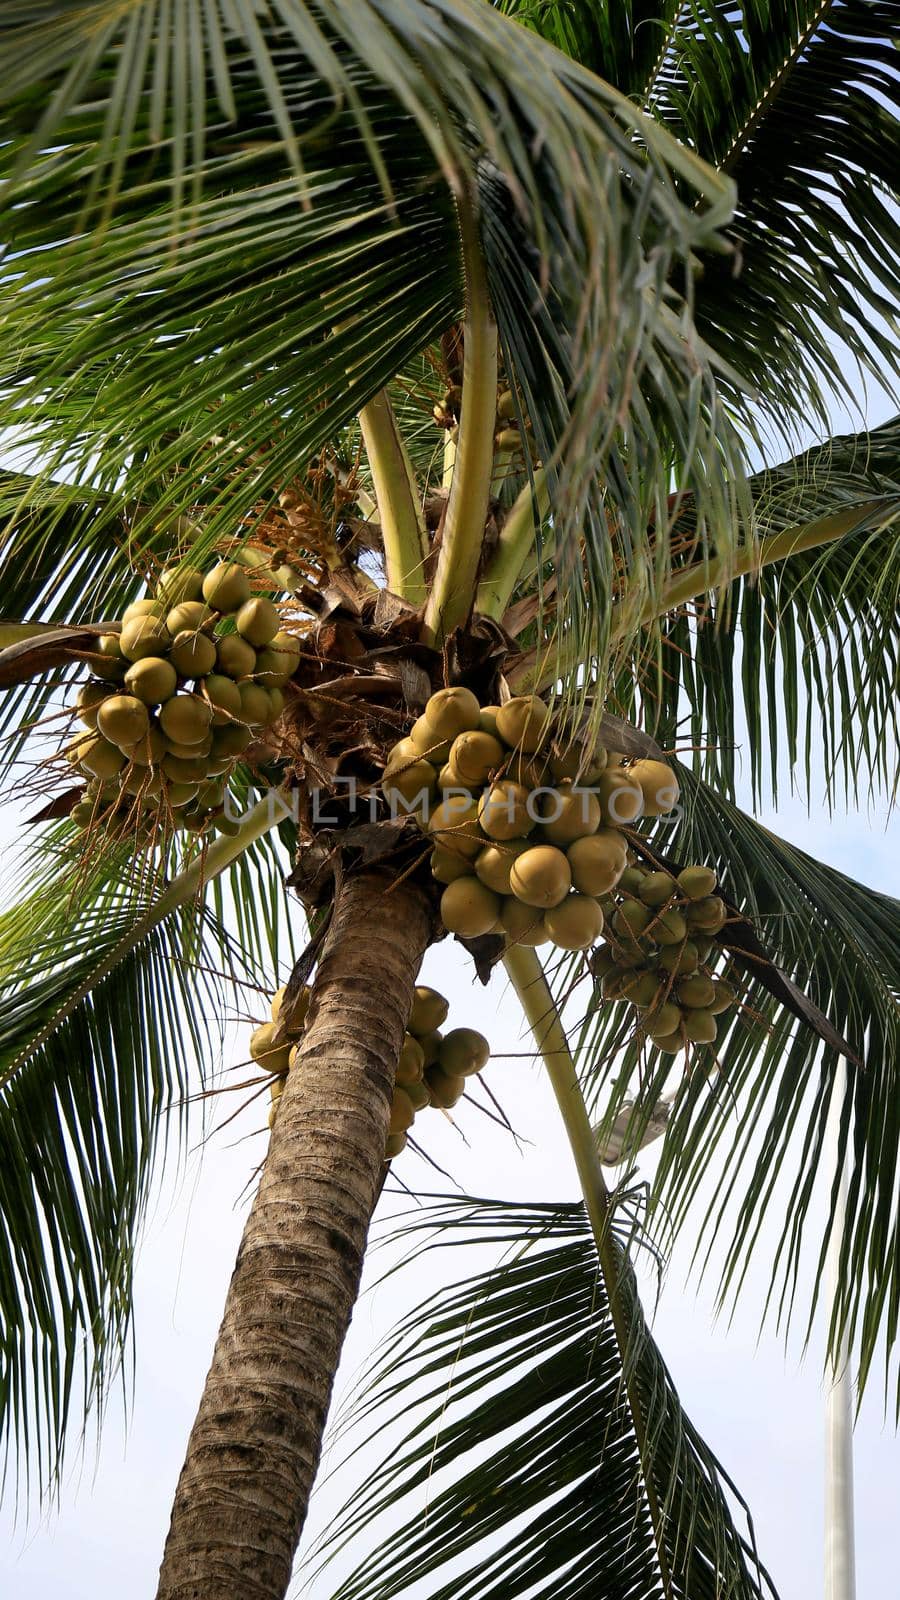 salvador, bahia / brazil - july 10, 2020: coconut tree is seen in the city of Salvador.











